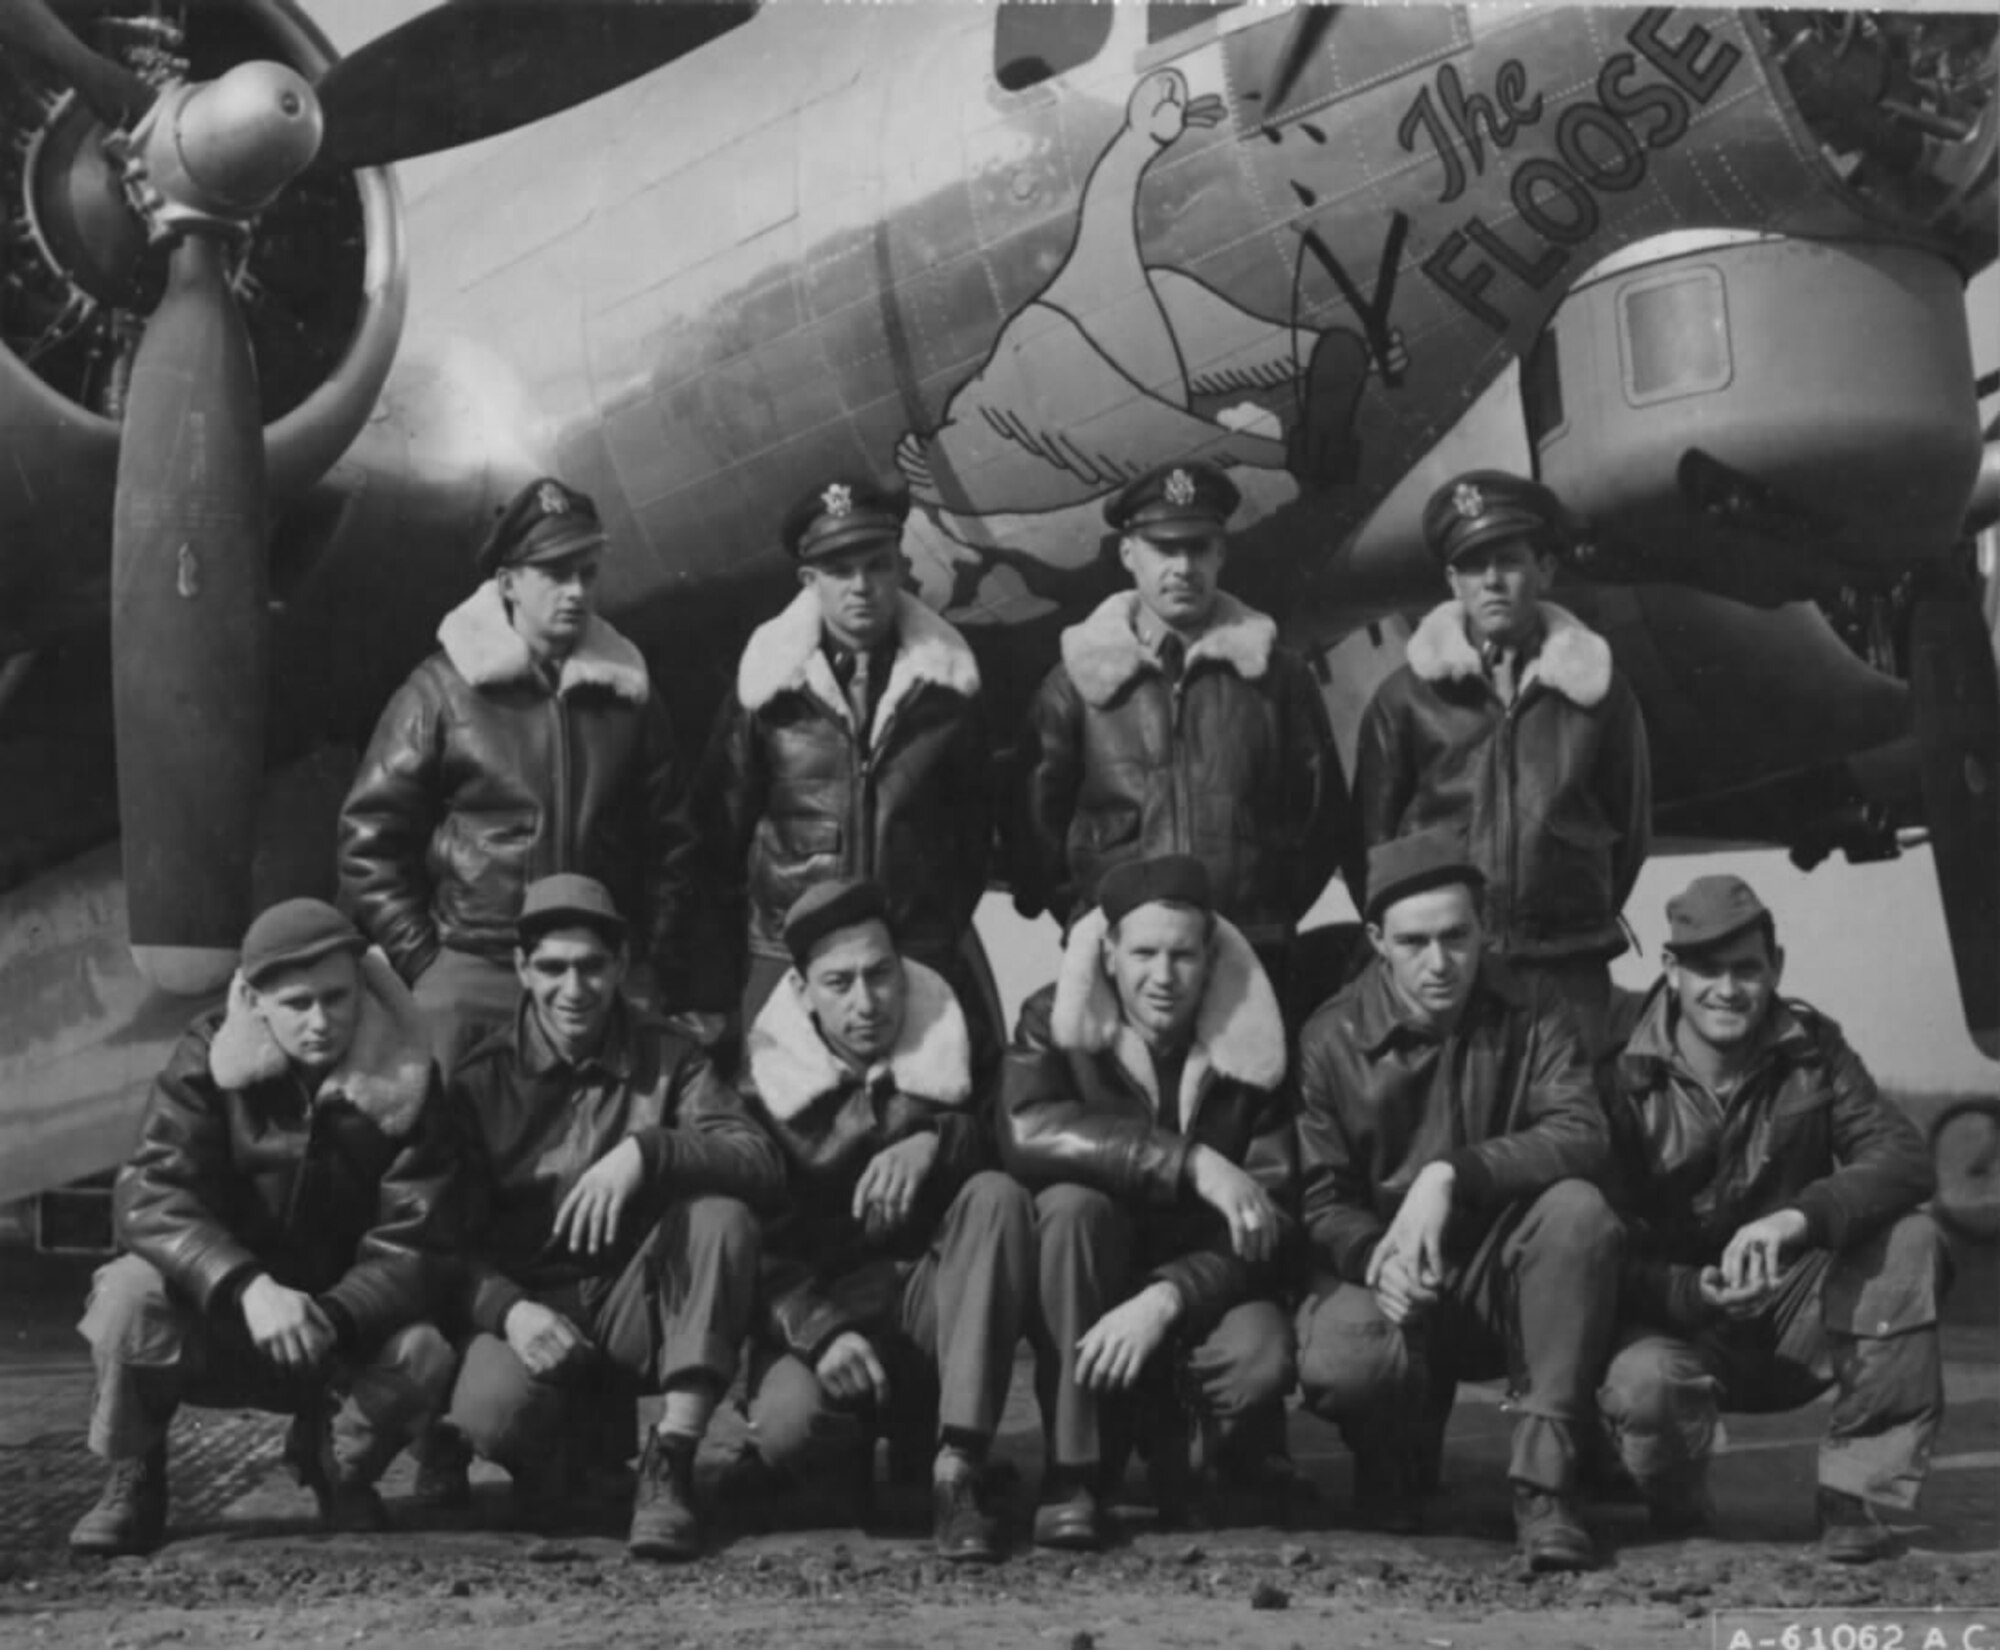 The late 2nd Lt. Jackson Palmer Jr., third from top left, was a navigator assigned to the 303rd Bombardment Group at RAF Molesworth, United Kingdom, when his plane was shot down by enemy forces while conducting an aerial mission during World War II May 28, 1944. His family only received notification of him missing in action. Nearly 70 years later, Palmer’s second cousins traveled to England to find out what happened to him and visit his grave site at the World War II American Cemetery and Memorial in Margraten, The Netherlands. (Courtesy photo/Released) 